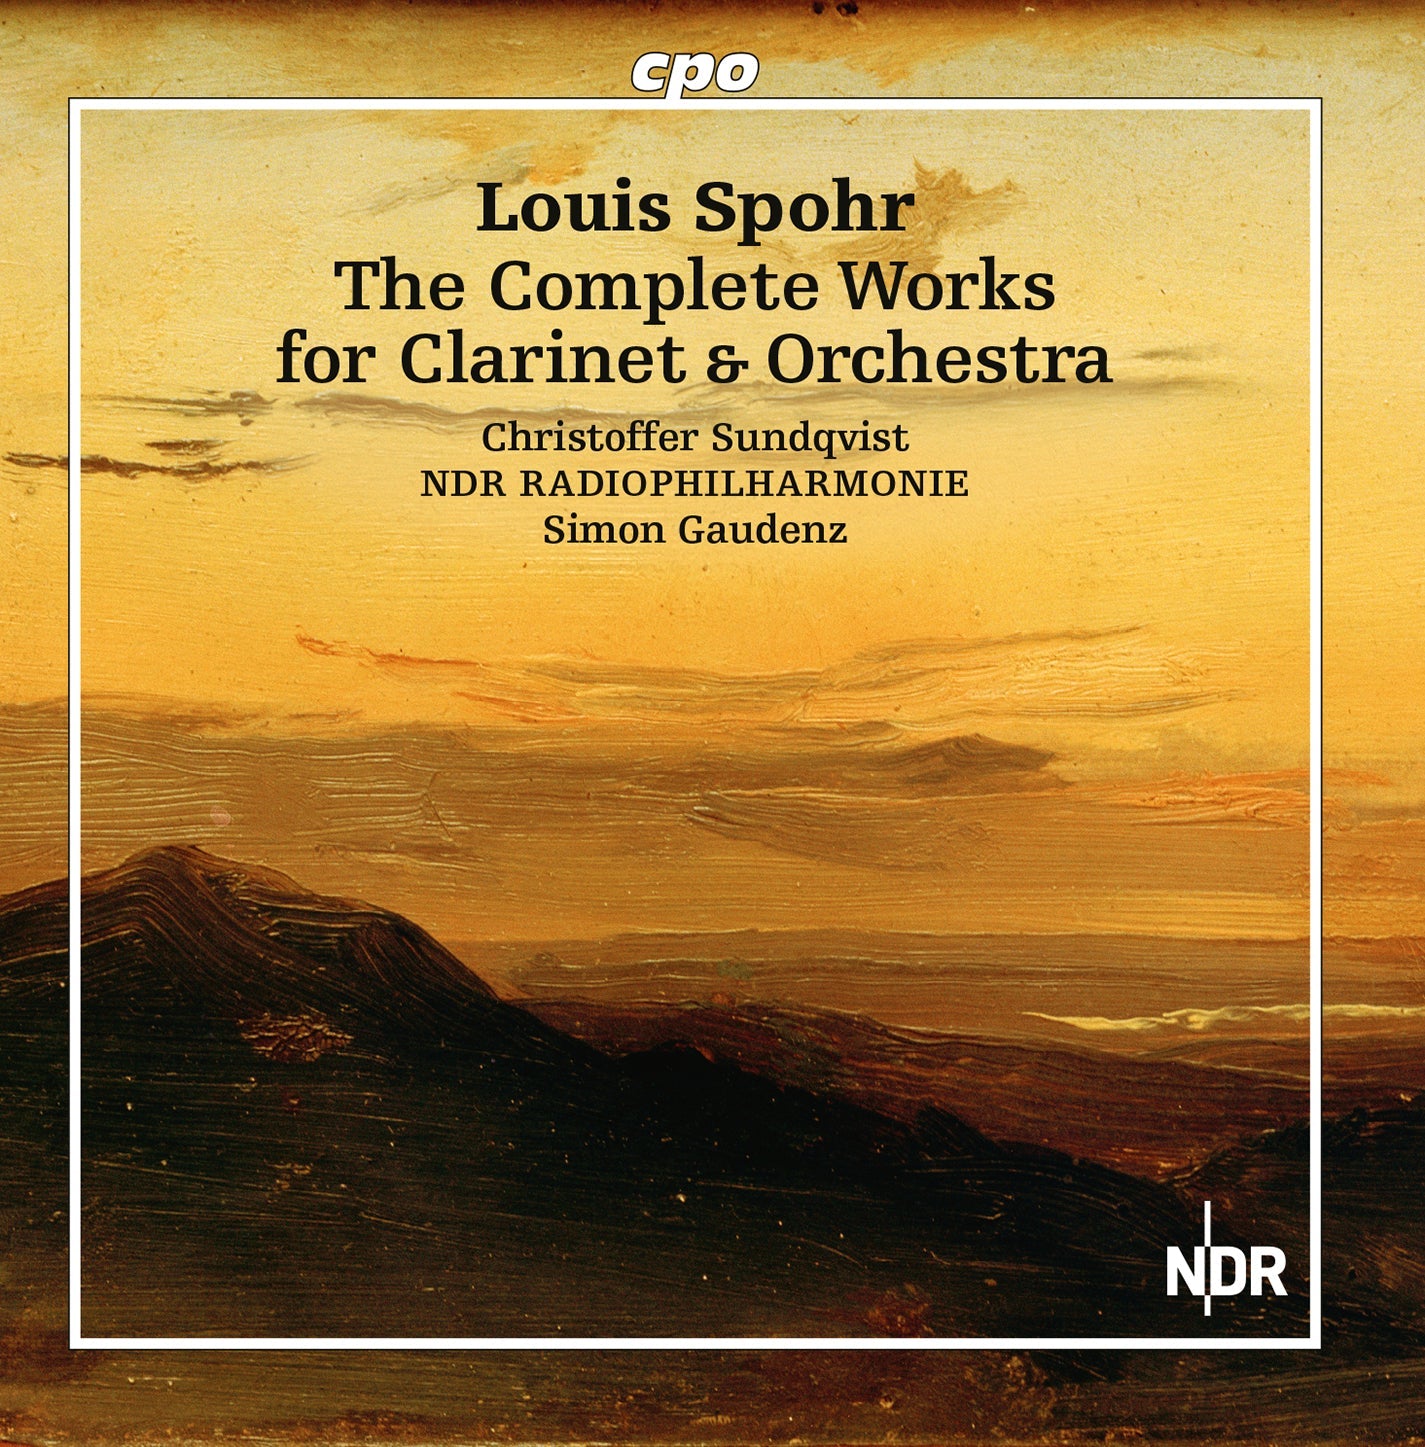 Spohr: The Complete Works For Clarinet & Orchestra